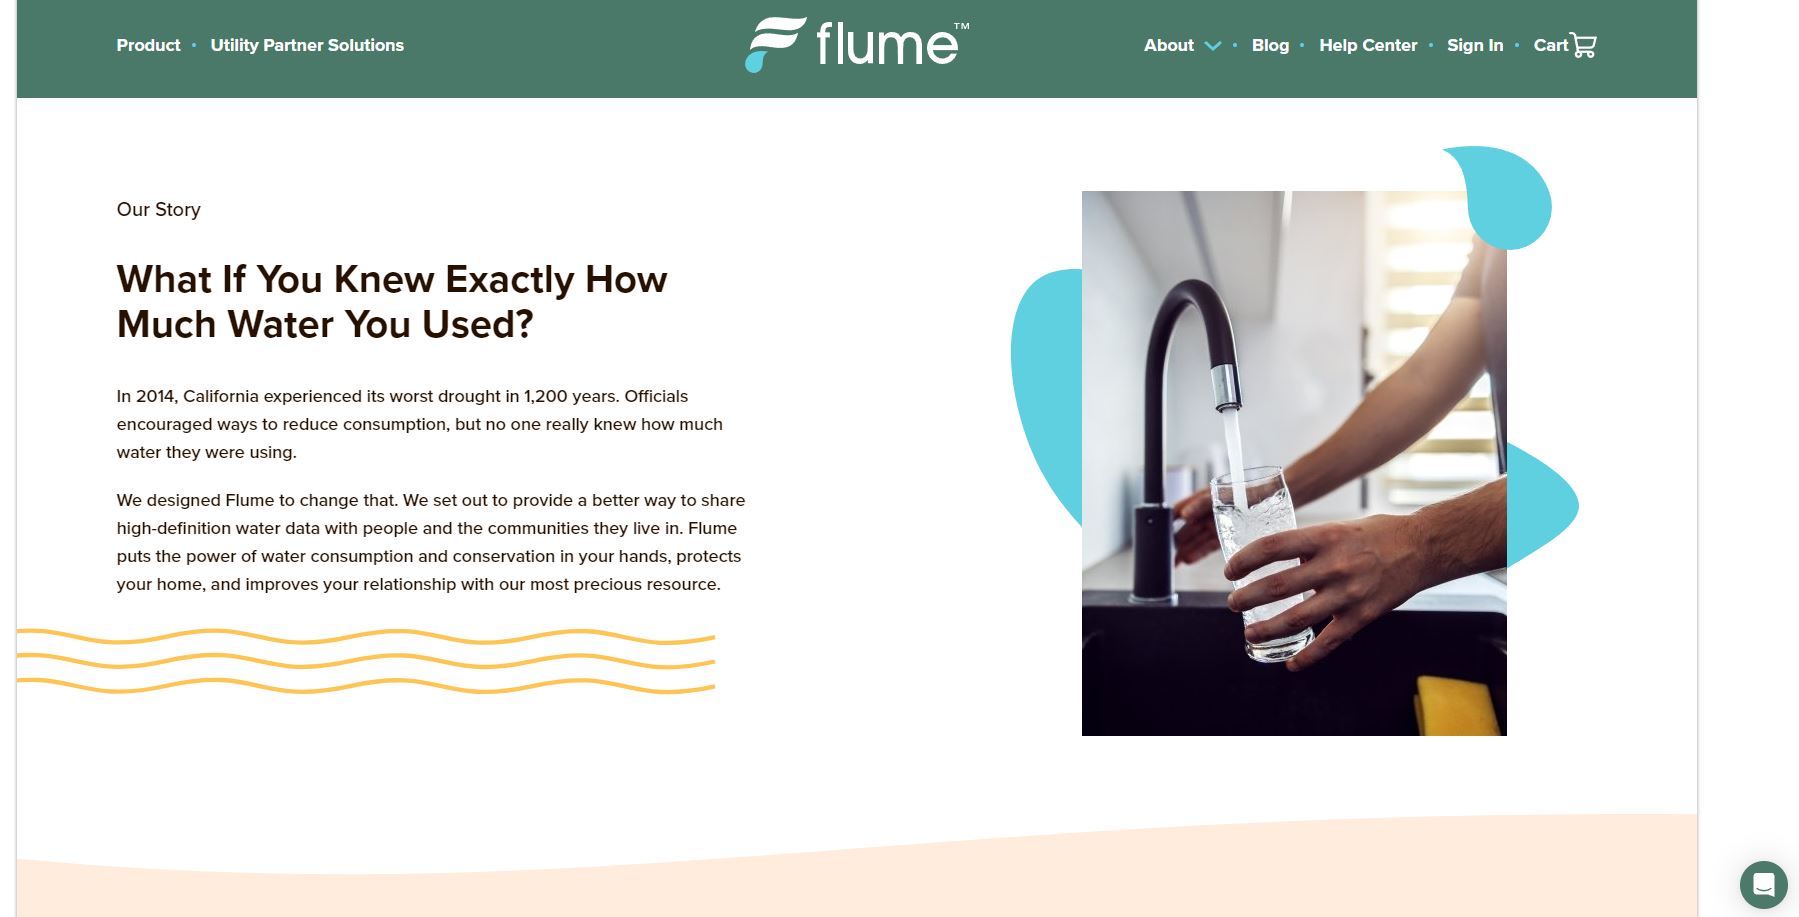 Flume Water is on a mission to protect homes, save money, and preserve water through its innovative solutions